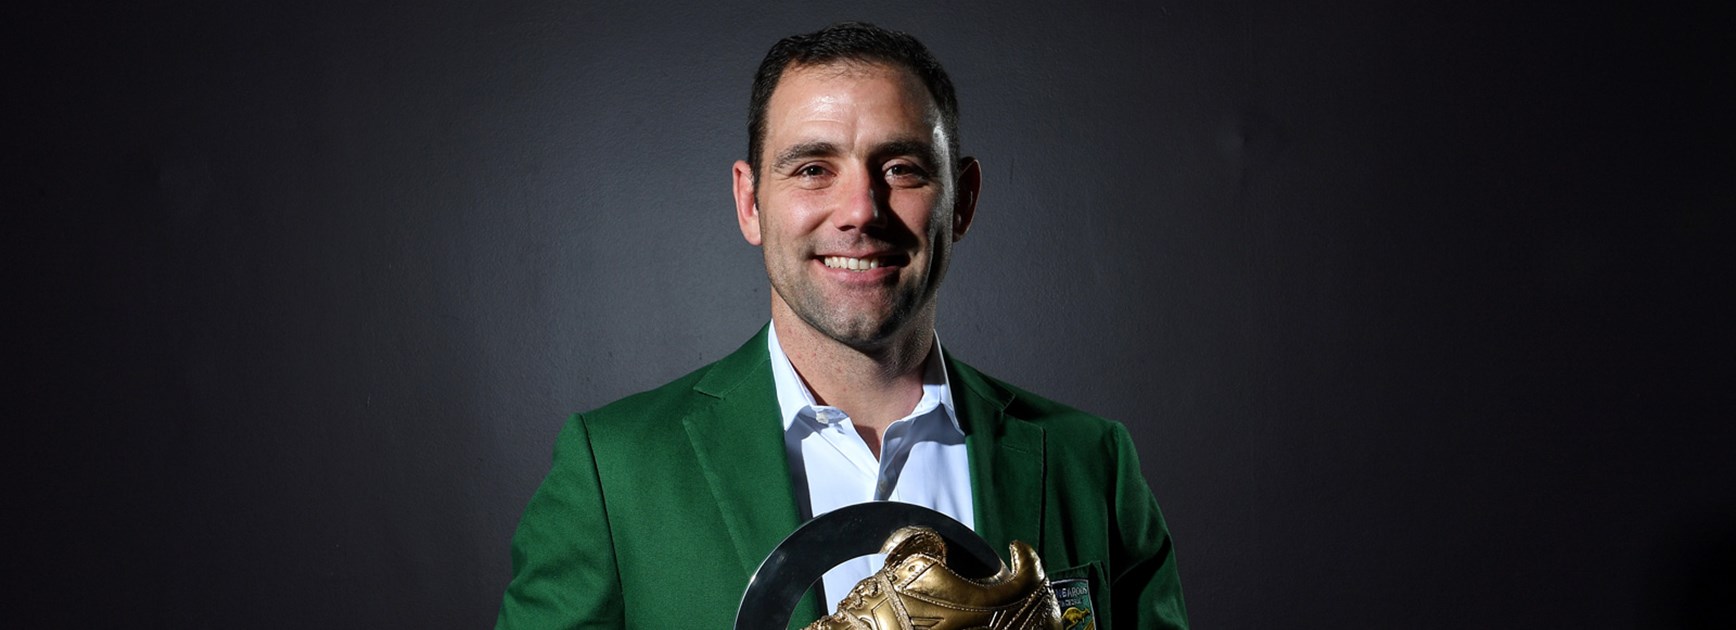 Cameron Smith is the winner of the 2017 Golden Boot.